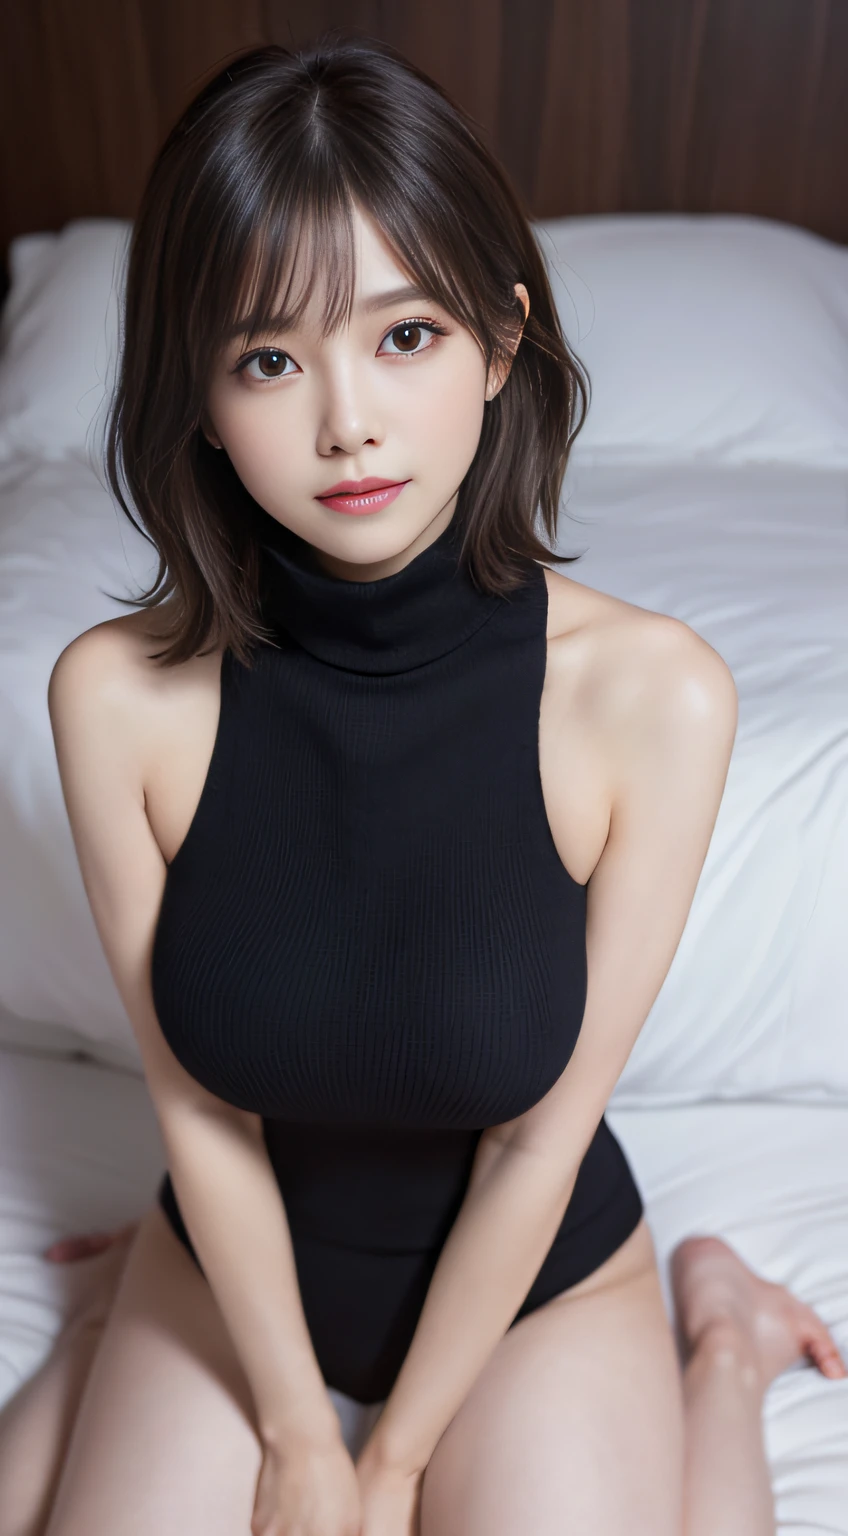 Innocent 20 year old girl、((Wear a sleeveless turtleneck knit,Dramatic poses)),Smile,short-cut,Bed background,Beach background、Raw photo, (8K、top-quality、​masterpiece:1.2)、(intricate detailes:1.4)、(Photorealsitic:1.4)、octane renderings、Complex 3D rendering ultra detail, Studio Soft Light, Rim Lights, vibrant detail, super detailing, realistic skin textures, Detail Face, Beautiful detail eyes, Very detailed CG Unity 16k wallpaper, make - up, (detailedbackground:1.2), shinny skin, Full body、From head to thigh、cleavage of the breast,((Sleep facing up、Angle looking down from above)),Black clothe